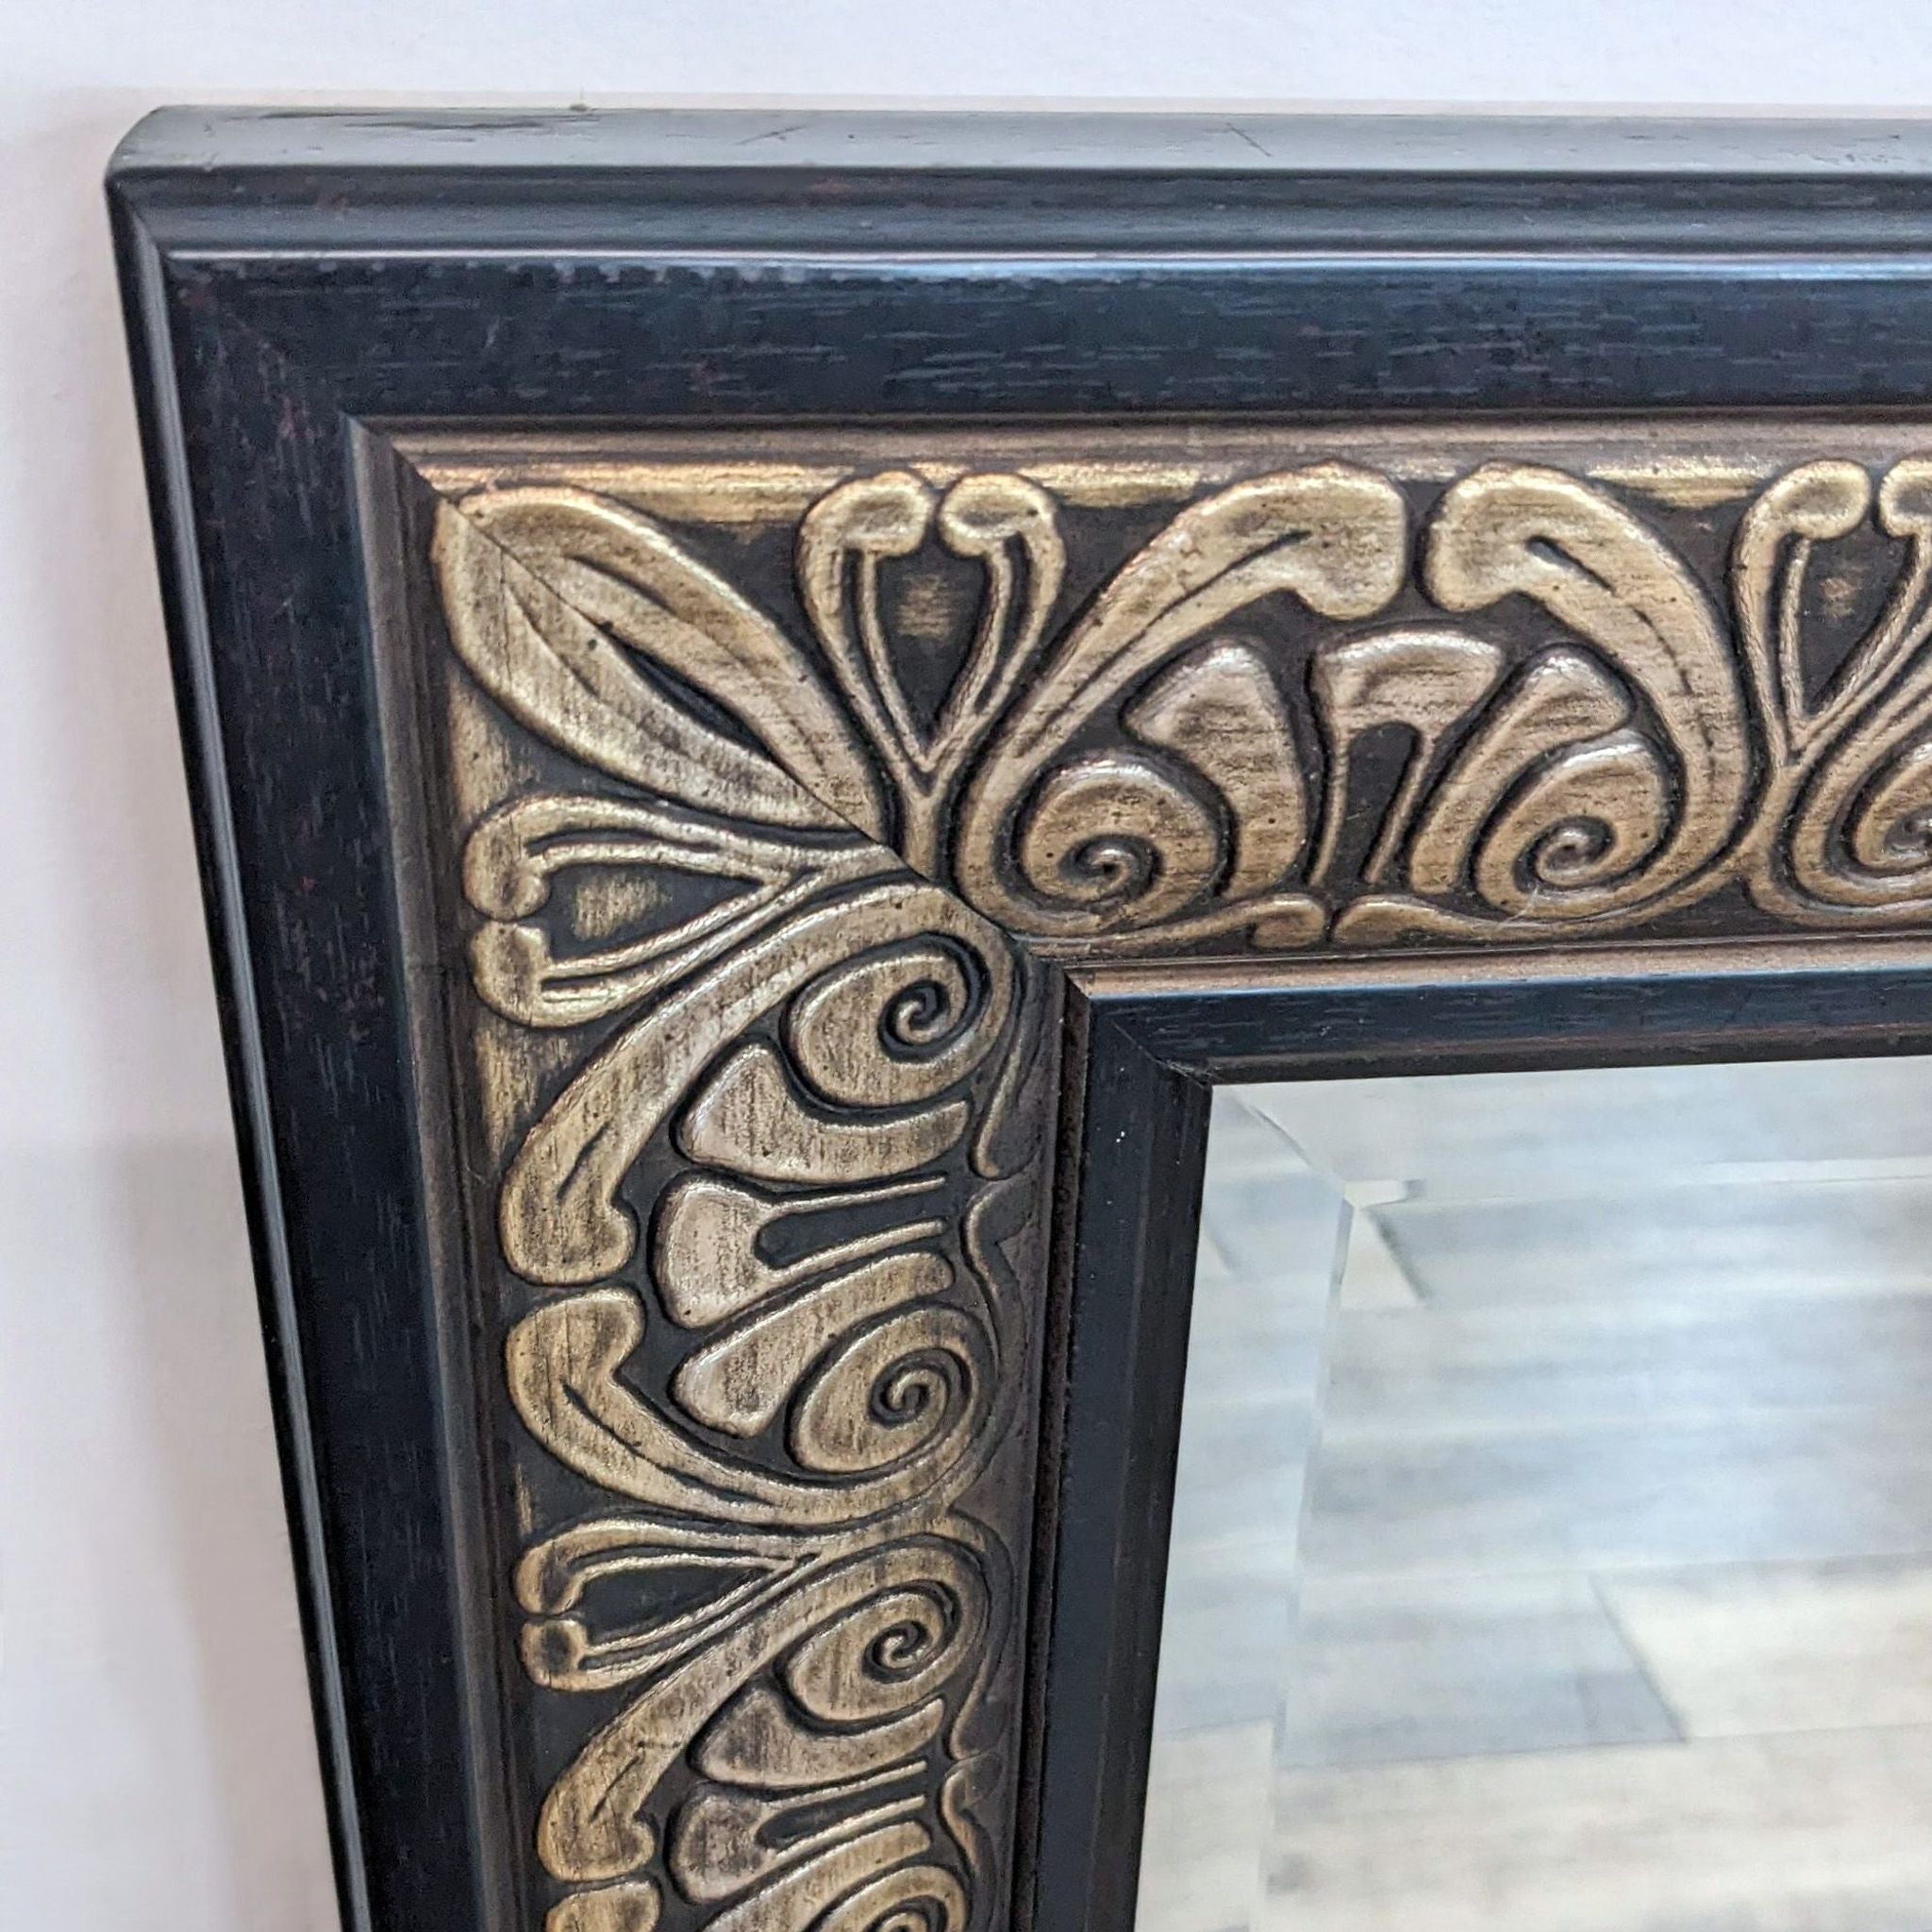 2. Close-up of World Market mirror's ornate carved detailing in antique brass finish, showcasing intricate patterns on its dark frame.